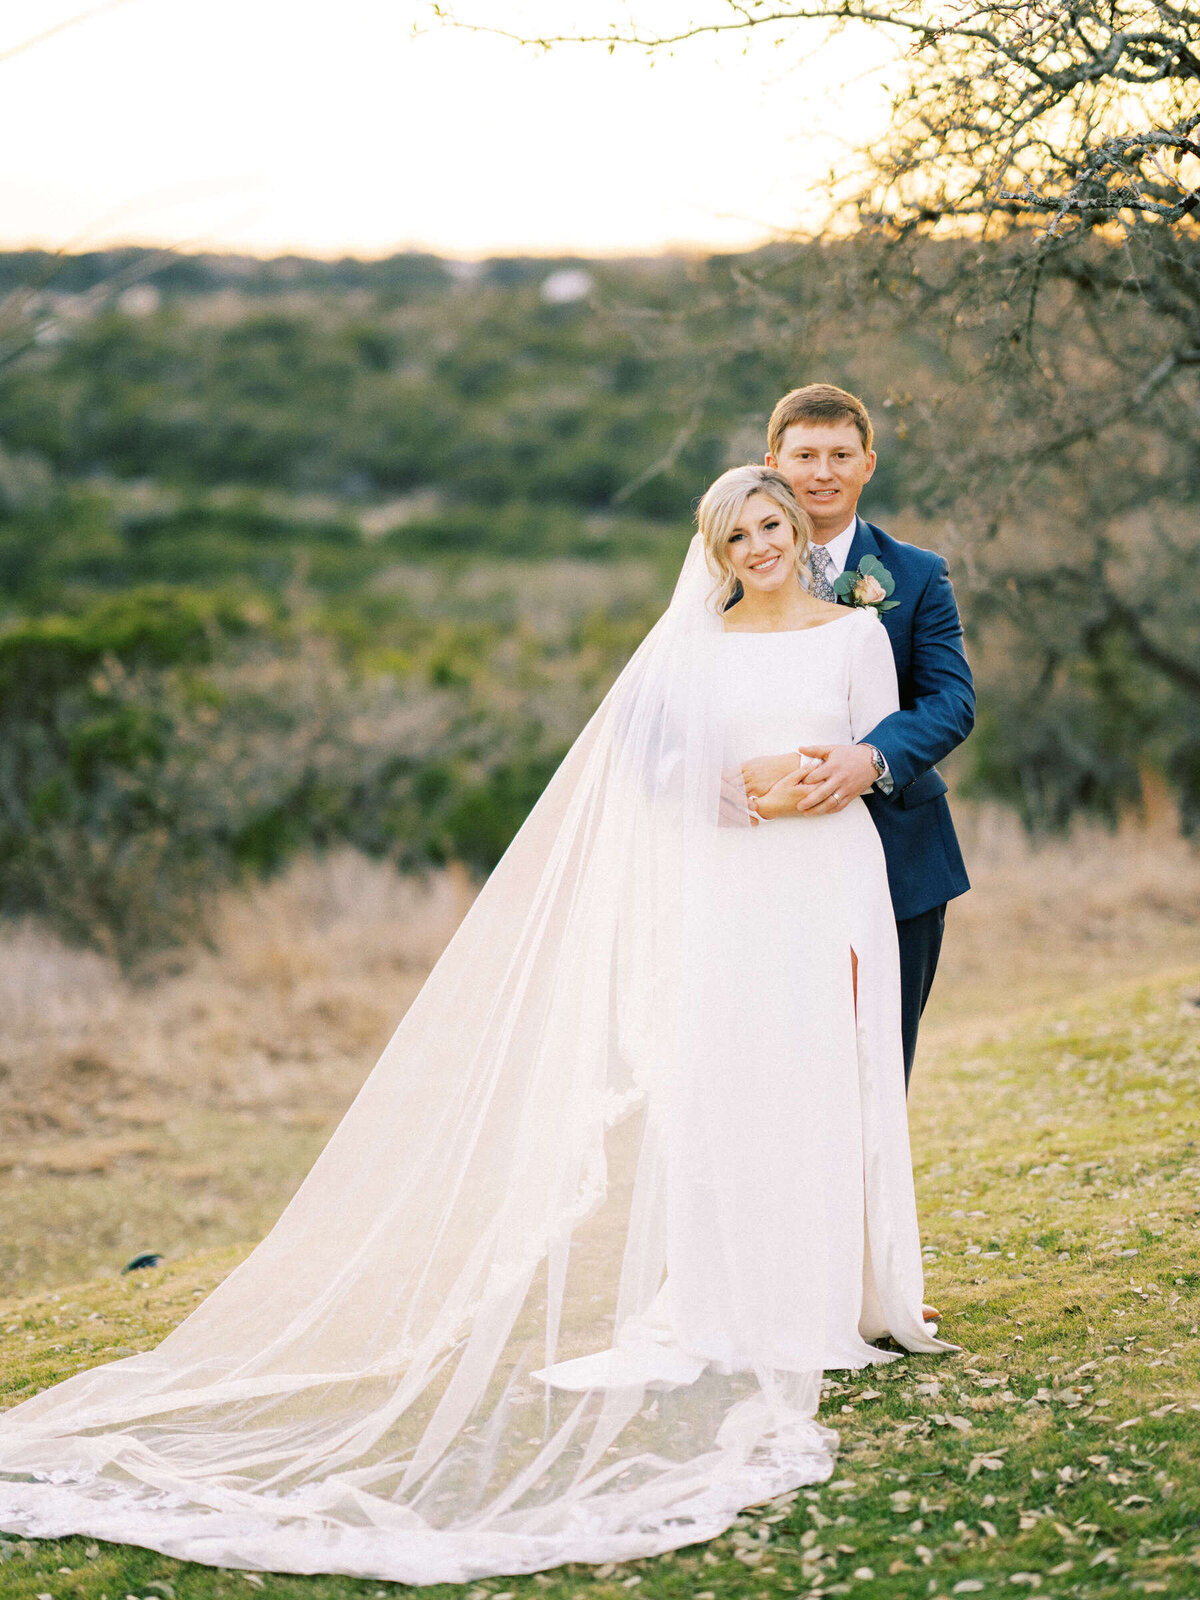 Bride with long cathedral veil is held by her husband in a meadow in Texas